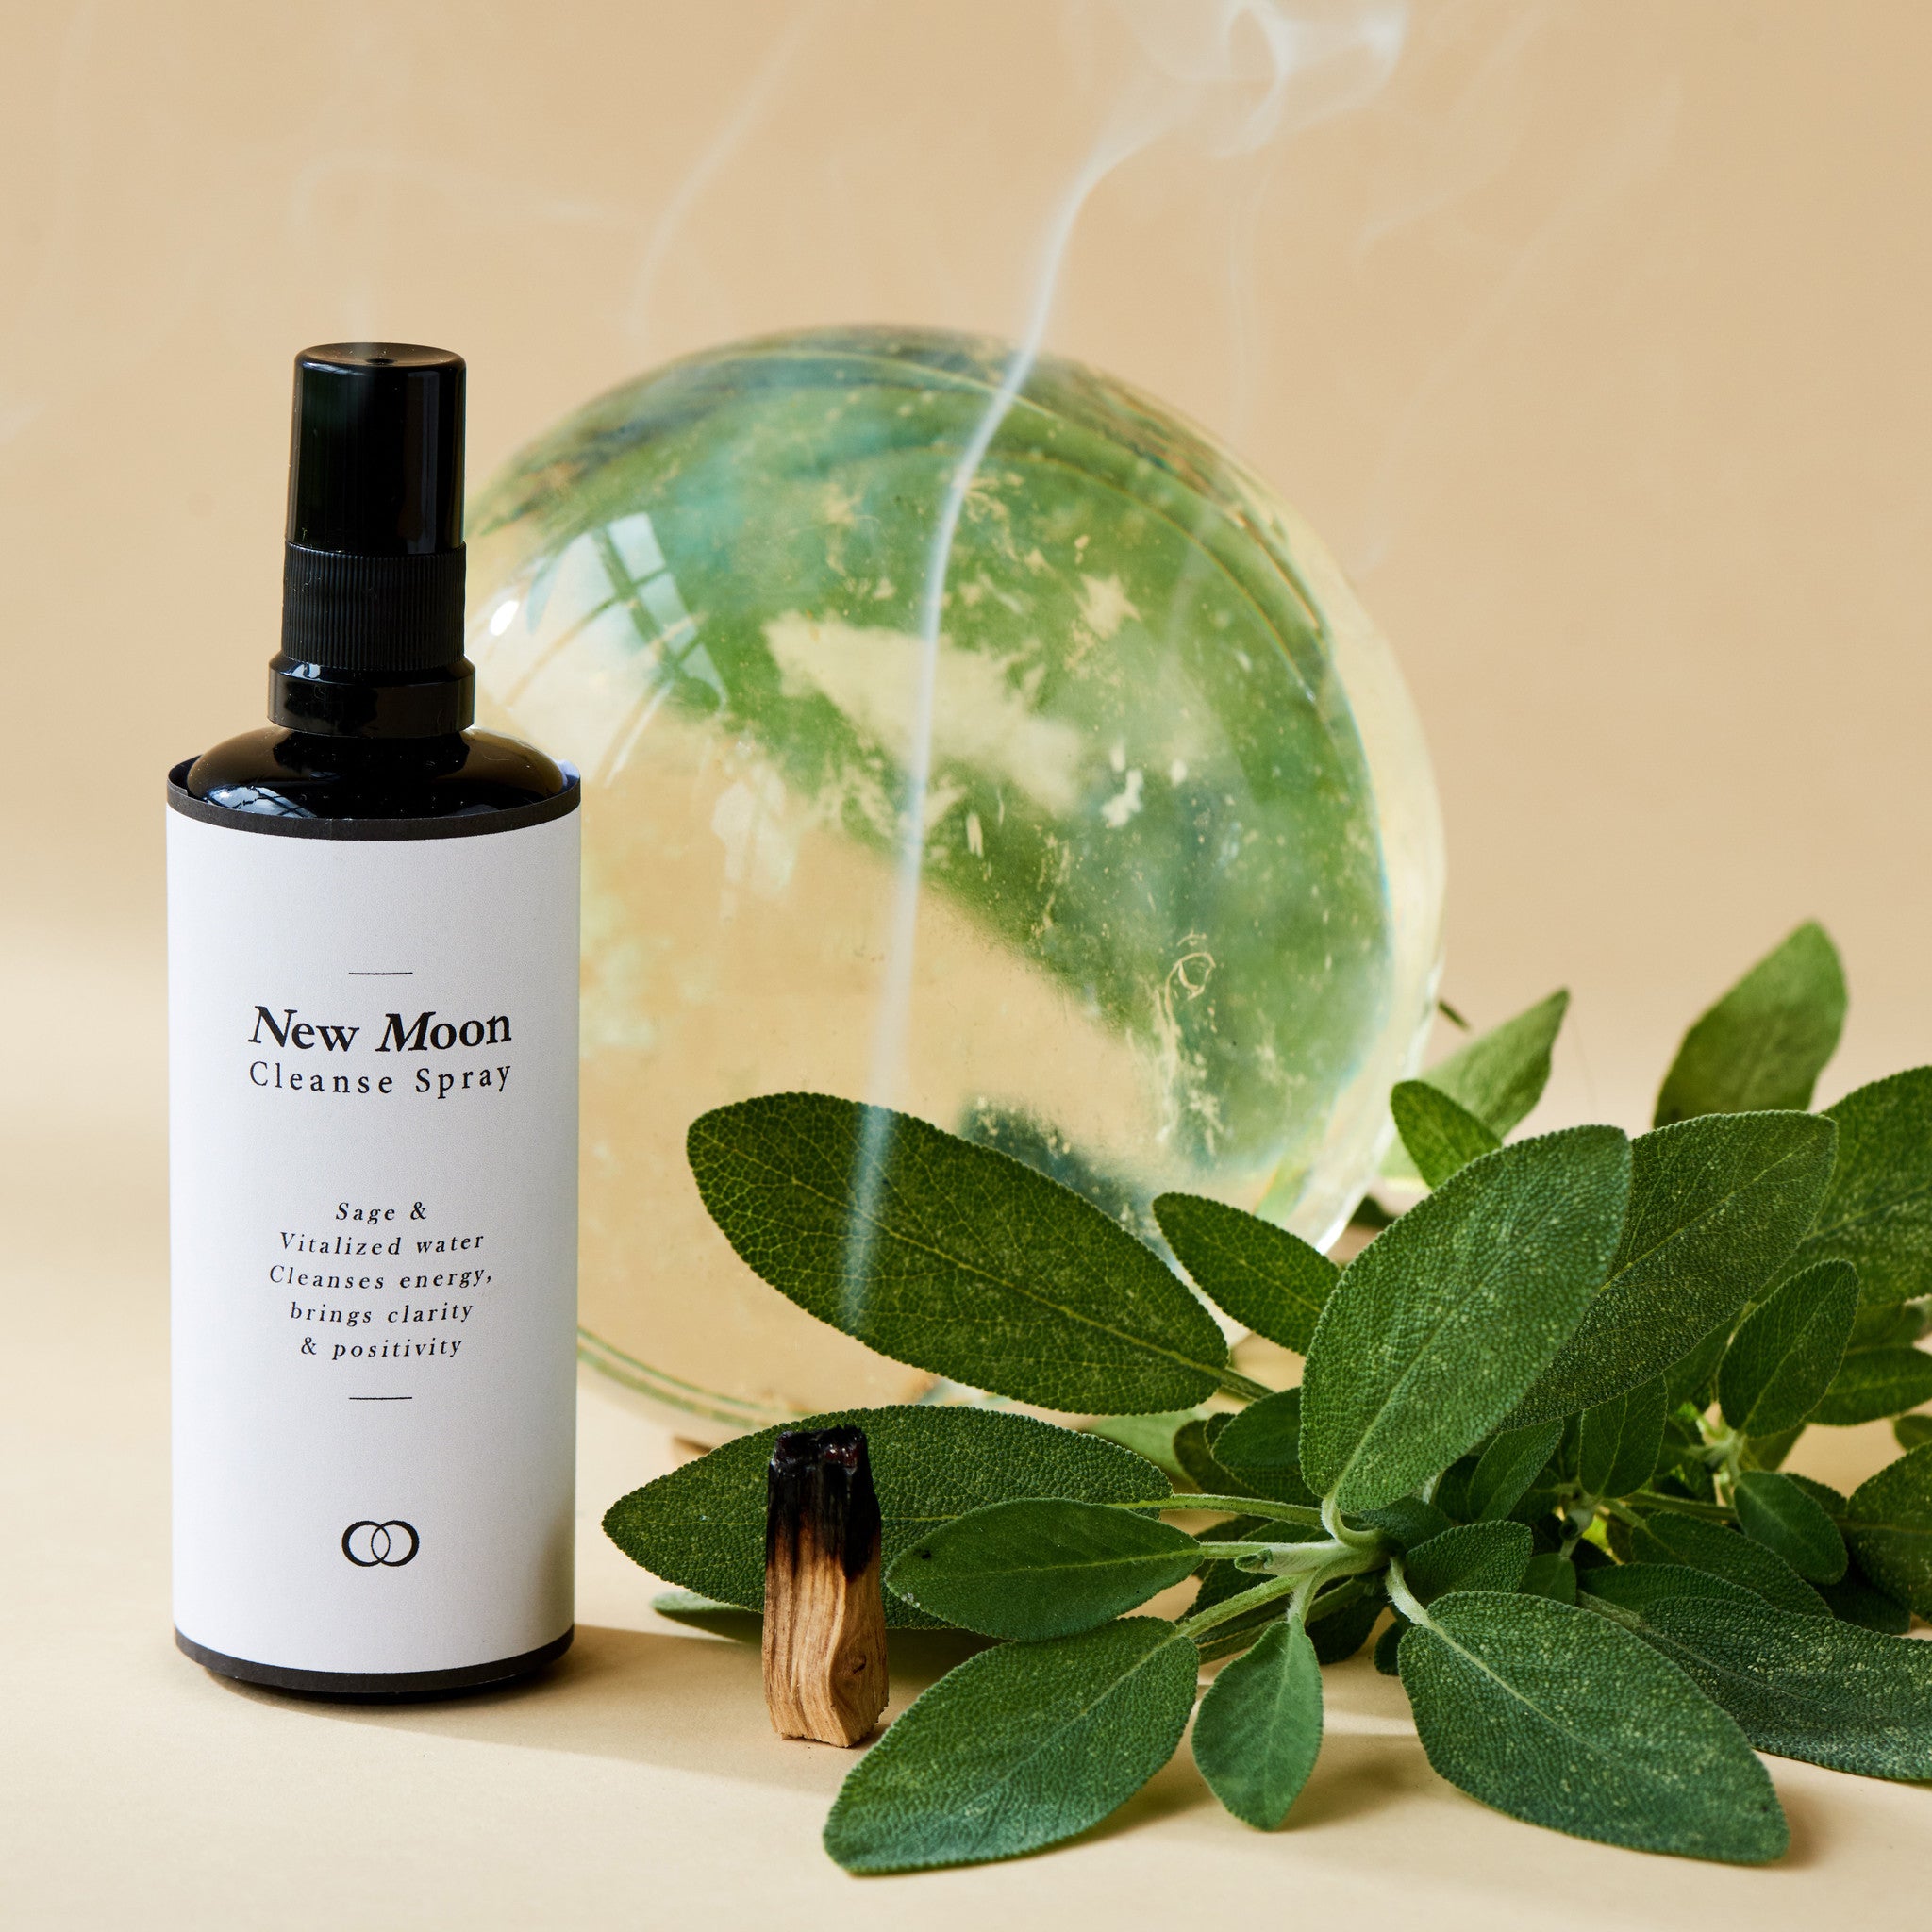 New Moon Cleanse Spray (sage)